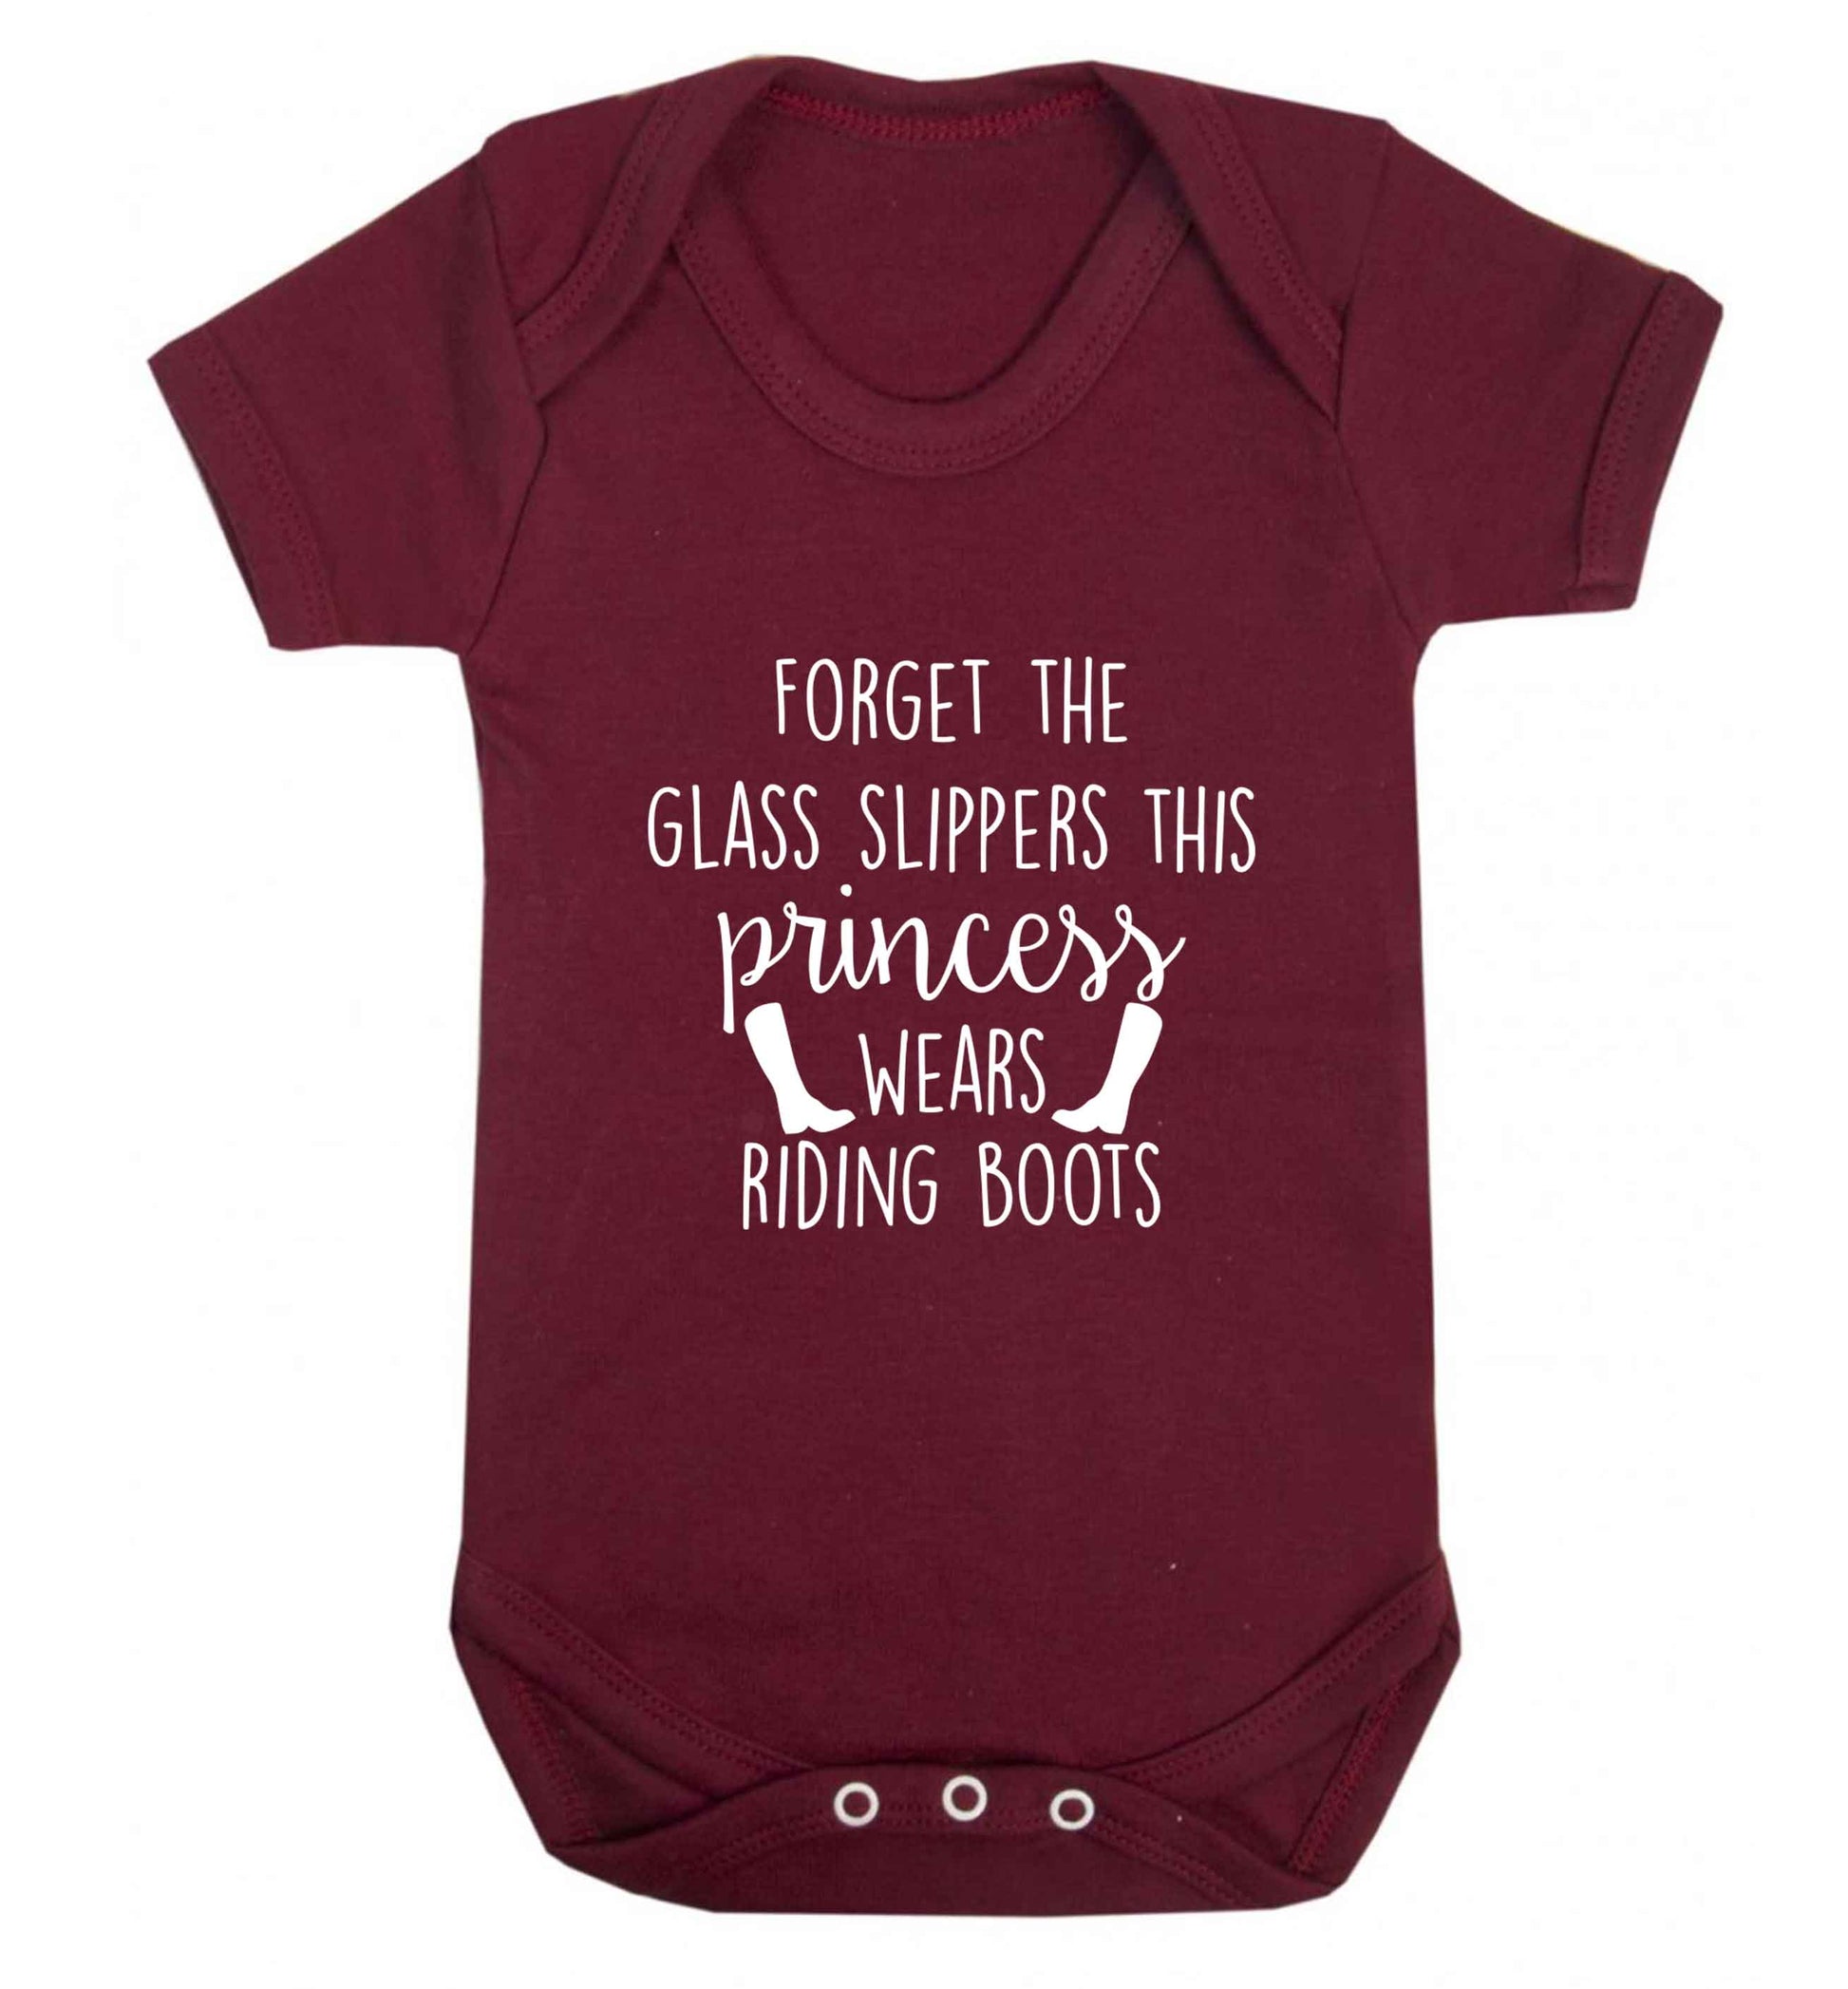 Forget the glass slippers this princess wears riding boots baby vest maroon 18-24 months